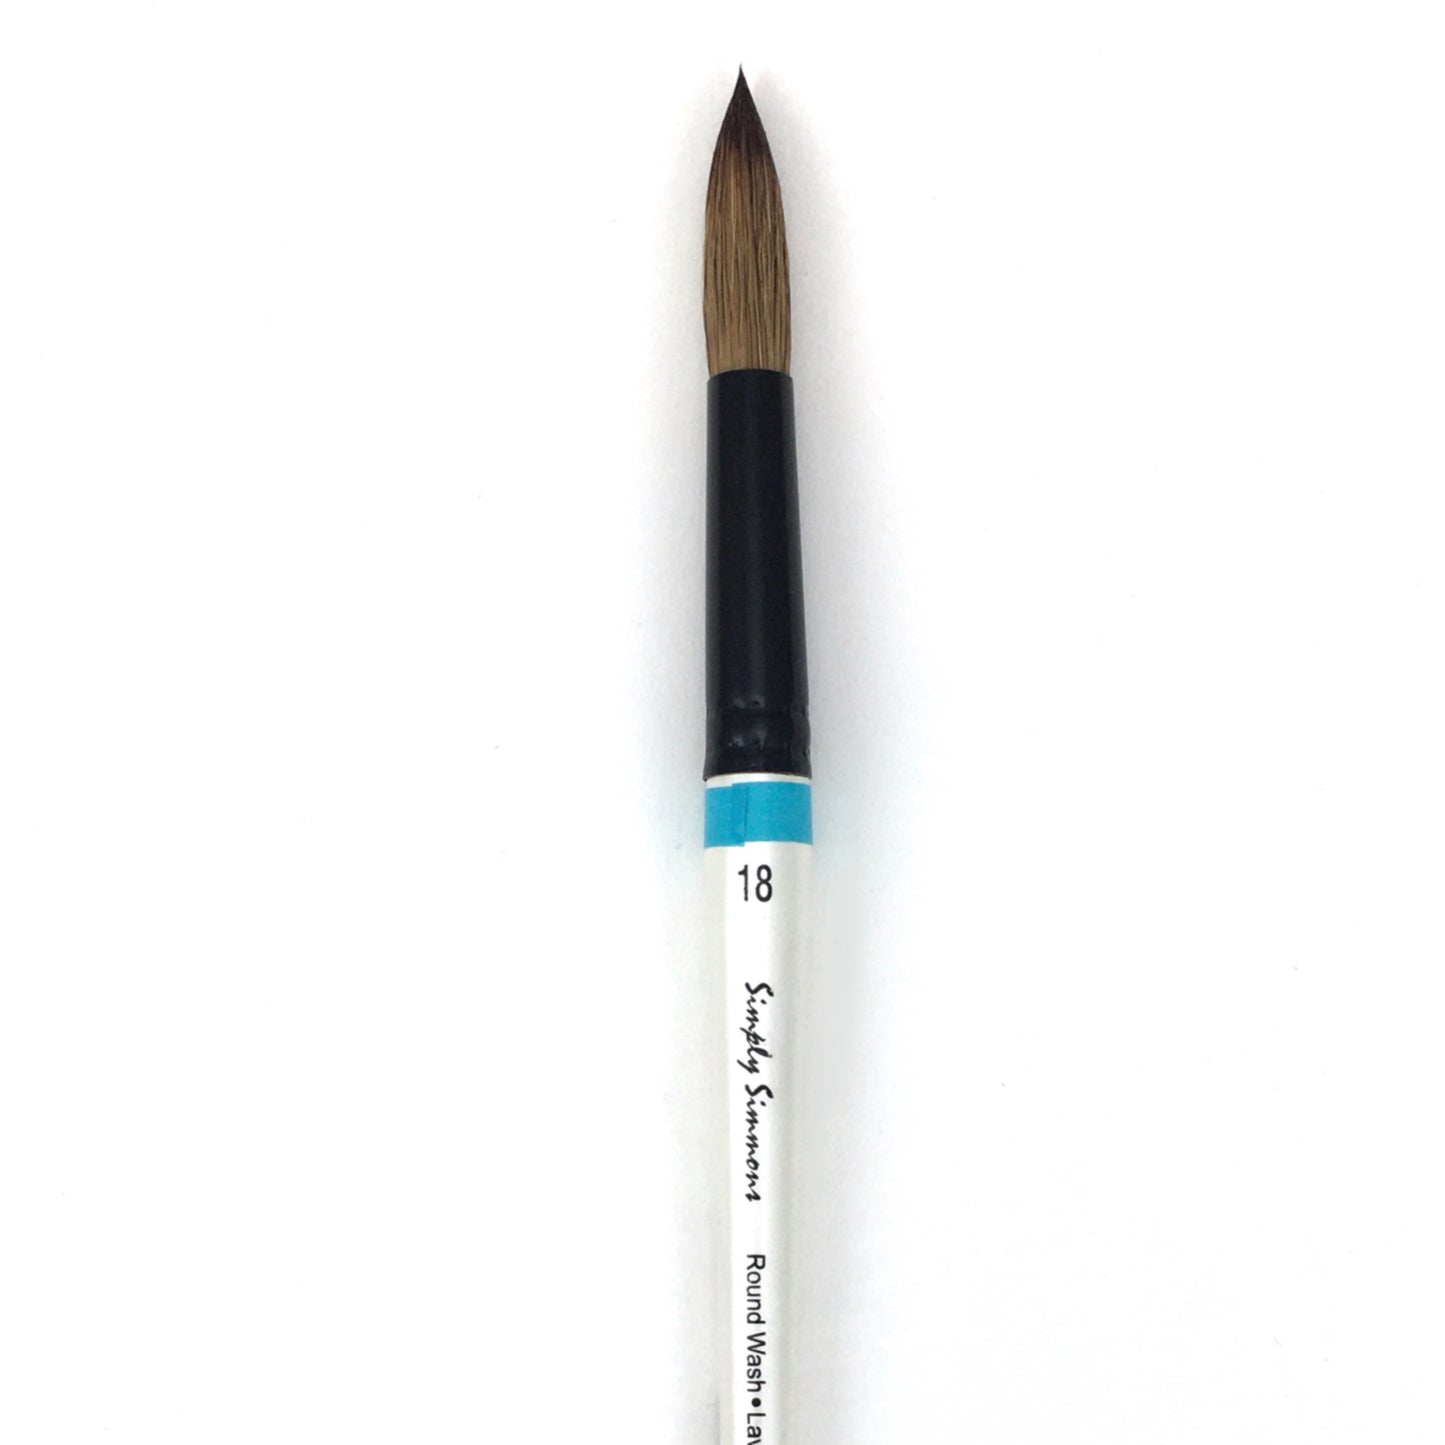 Simply Simmons Watercolor Brush - Short Handle - Round Wash / - #18 / - natural by Robert Simmons - K. A. Artist Shop